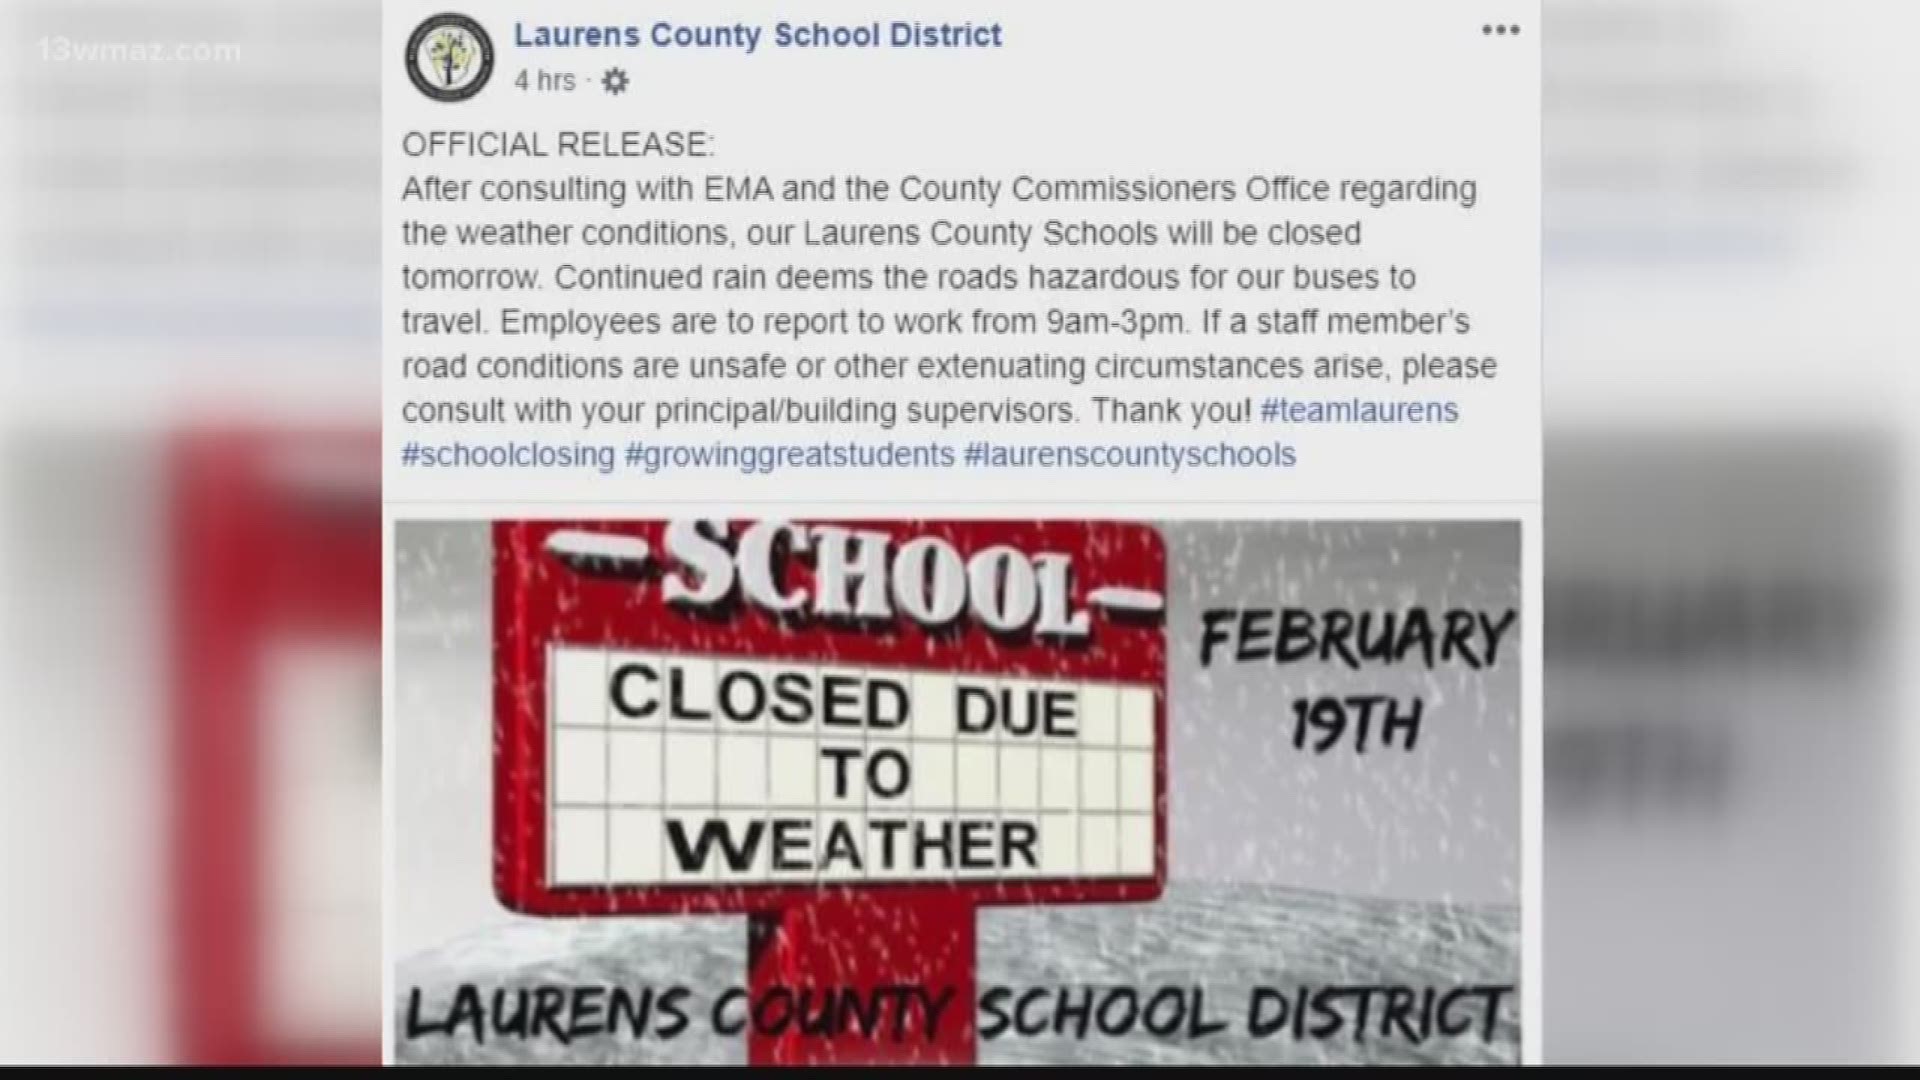 This week's rainy conditions are shutting down Laurens County schools on Wednesday.